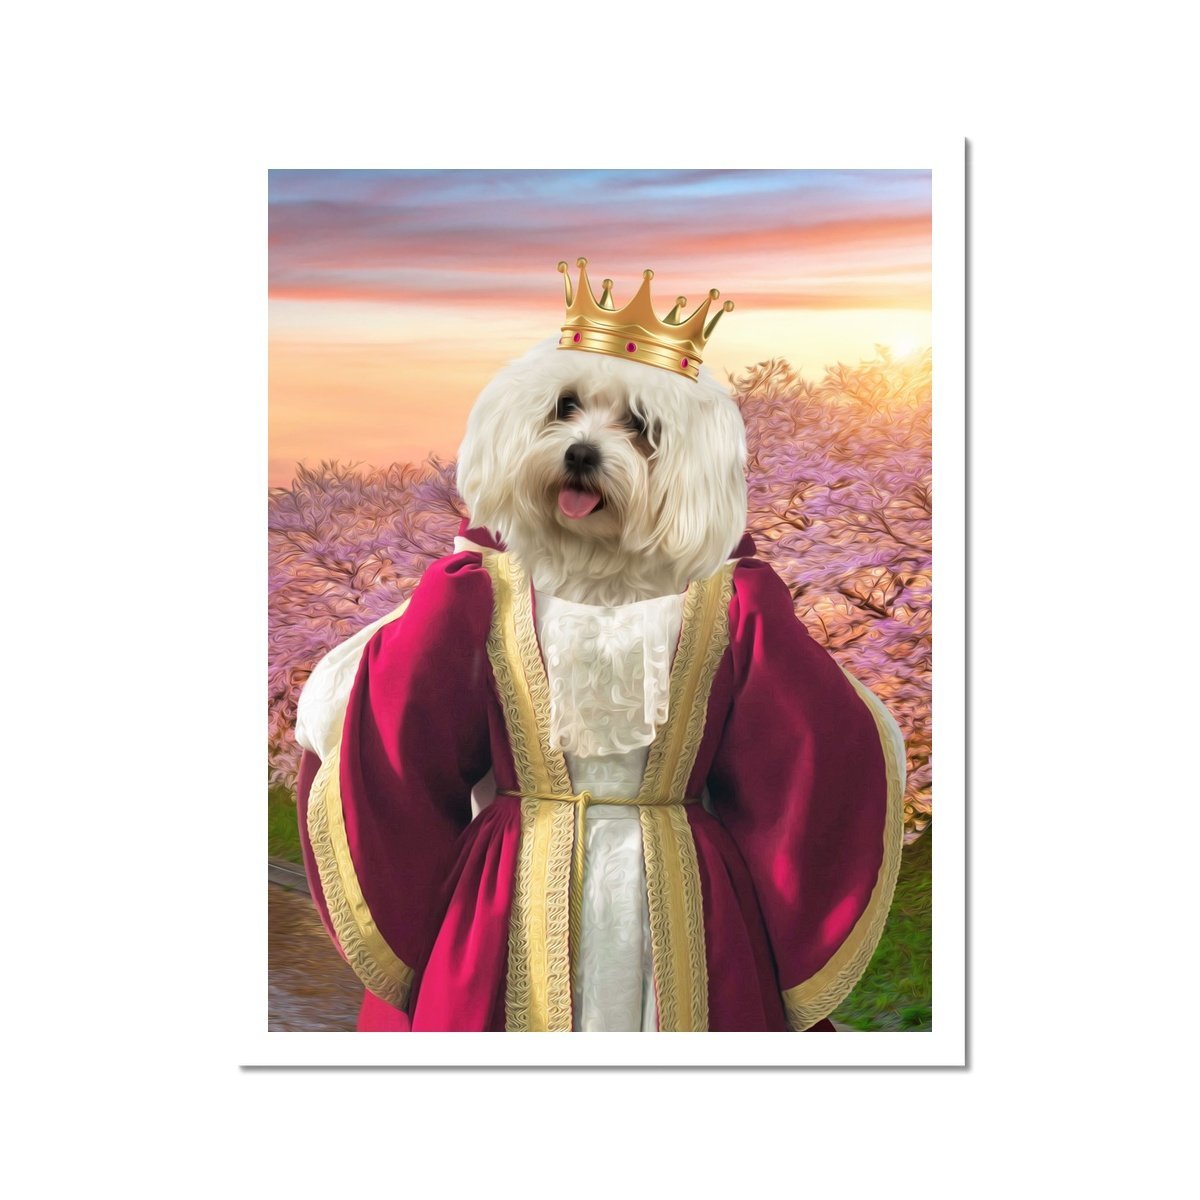 Queen Anne: Custom Pet Poster - Paw & Glory - #pet portraits# - #dog portraits# - #pet portraits uk#Paw & Glory, paw and glory, my pet painting, dog portraits colorful, my pet painting, pet photo clothing, pet portraits, paintings of pets from photos, pet portraits